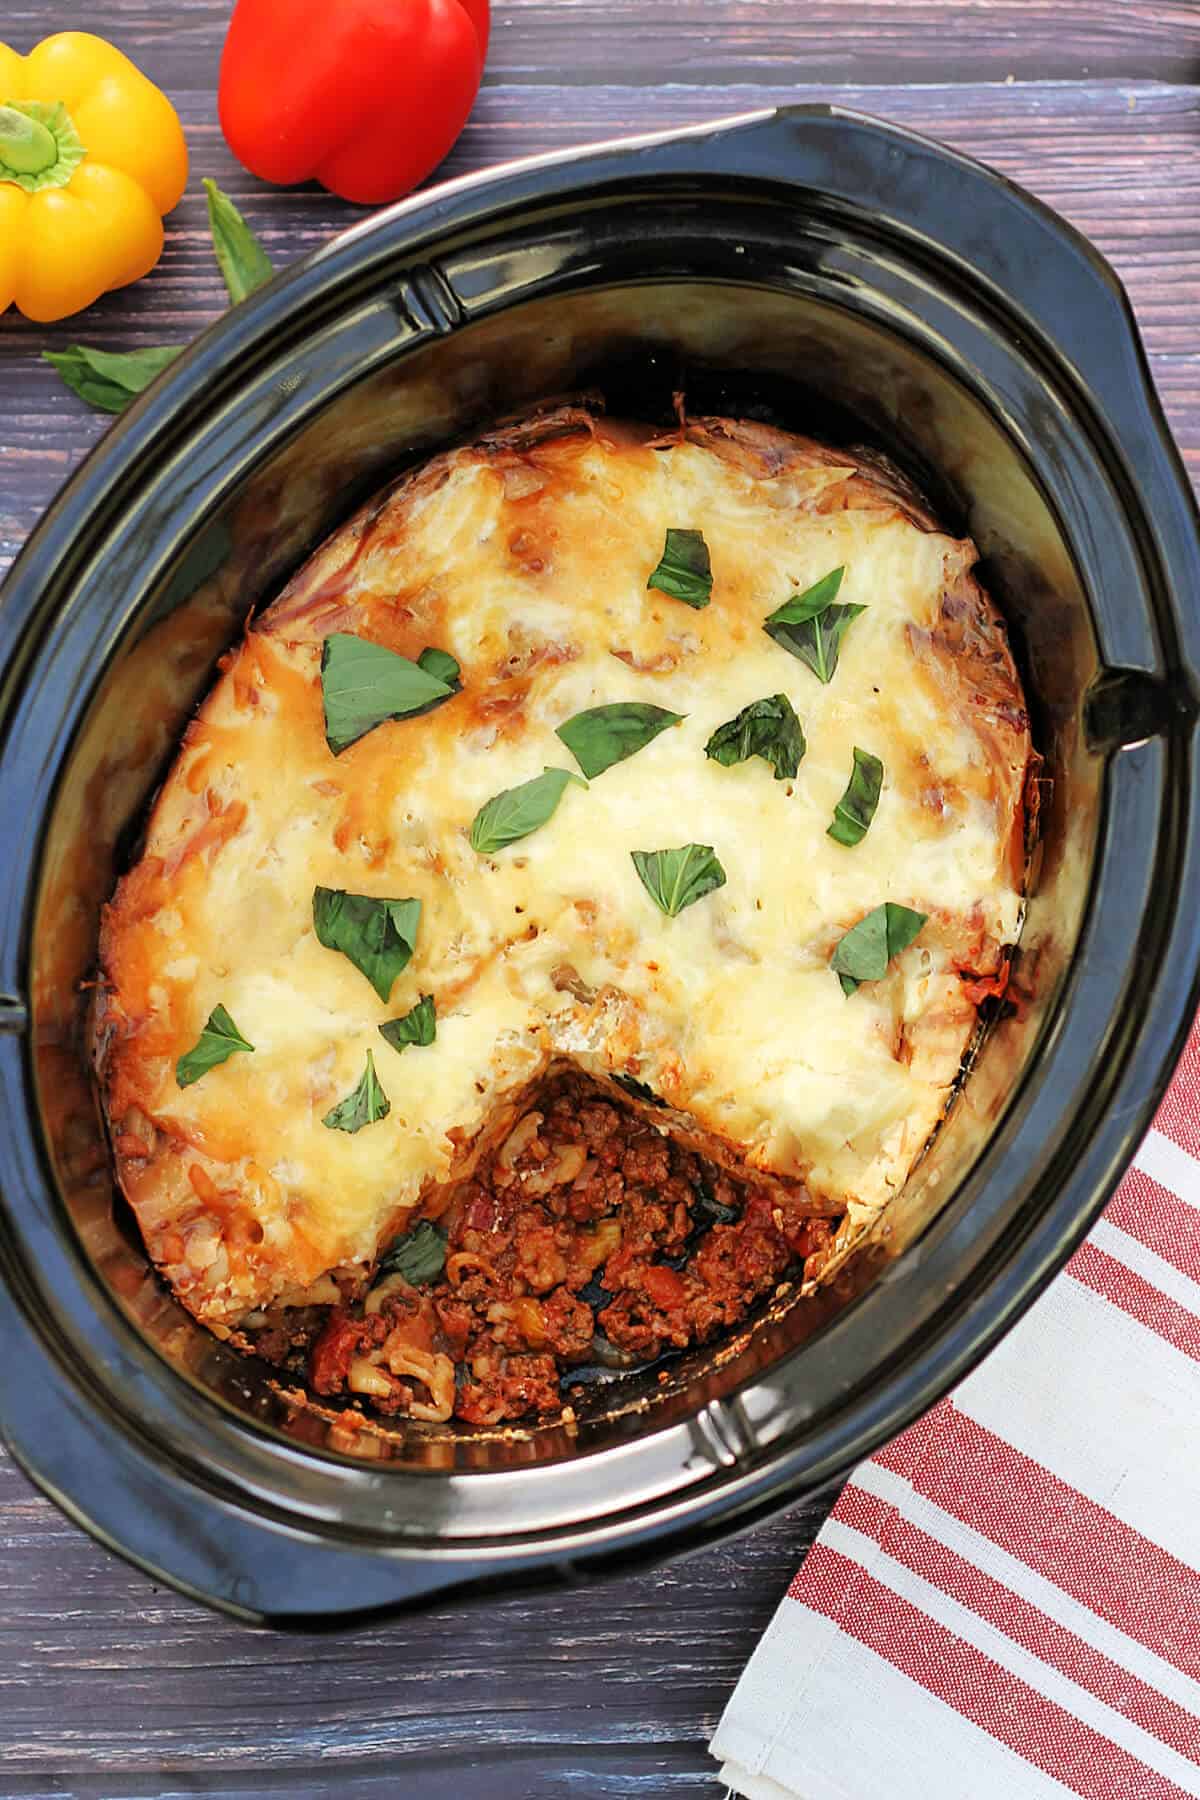 Slow cooker pot containing cooked lasagne garnished with basil.